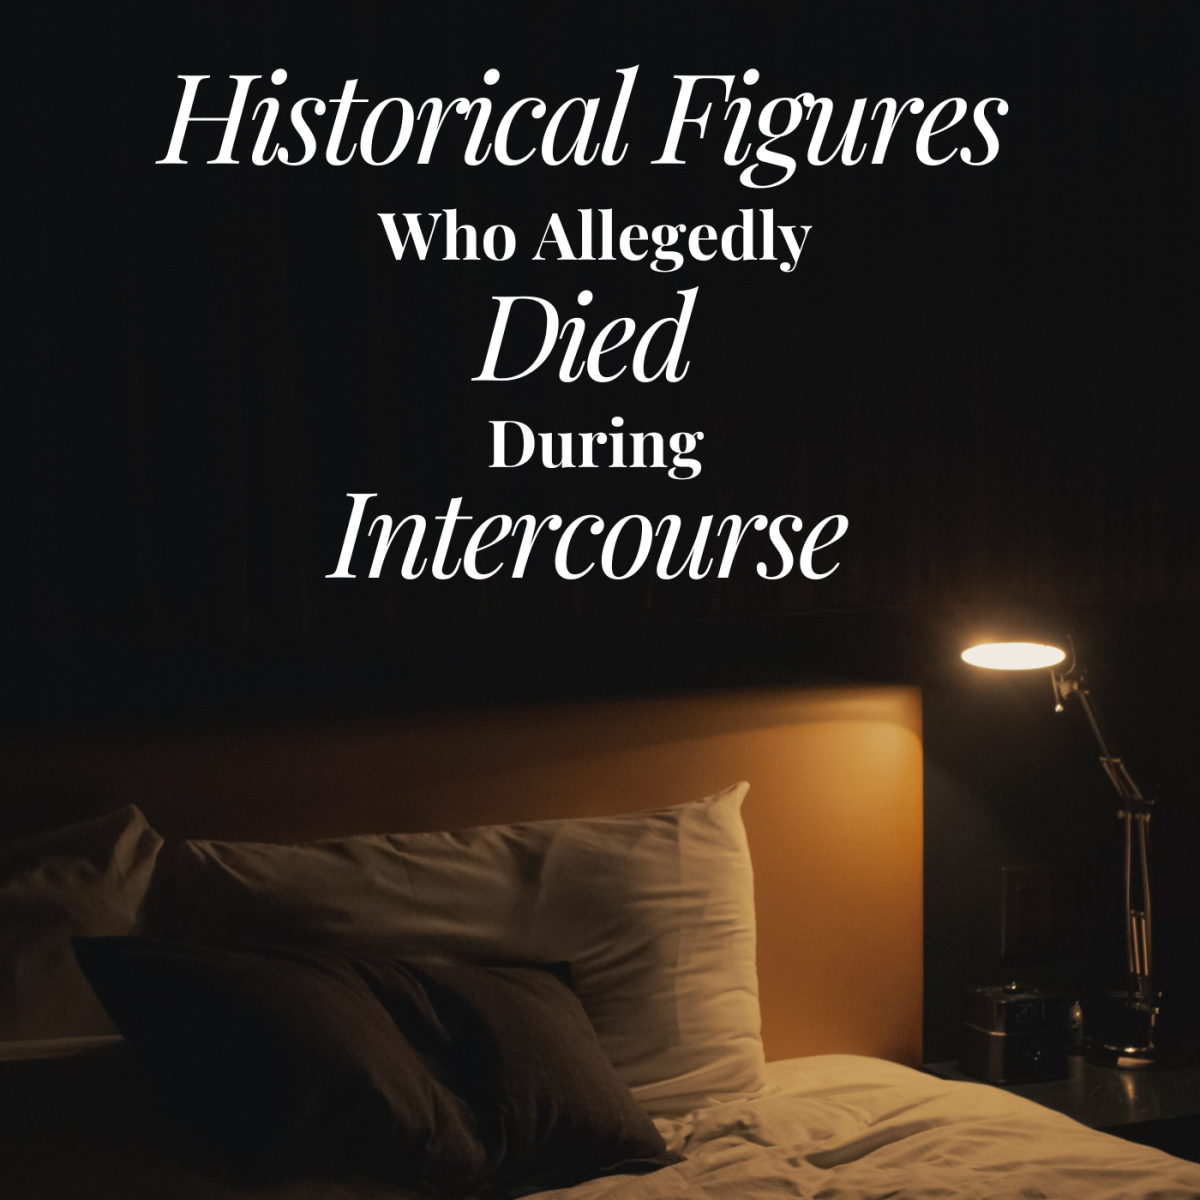 10 Historical Figures Who Allegedly Died During Sexual Intercourse